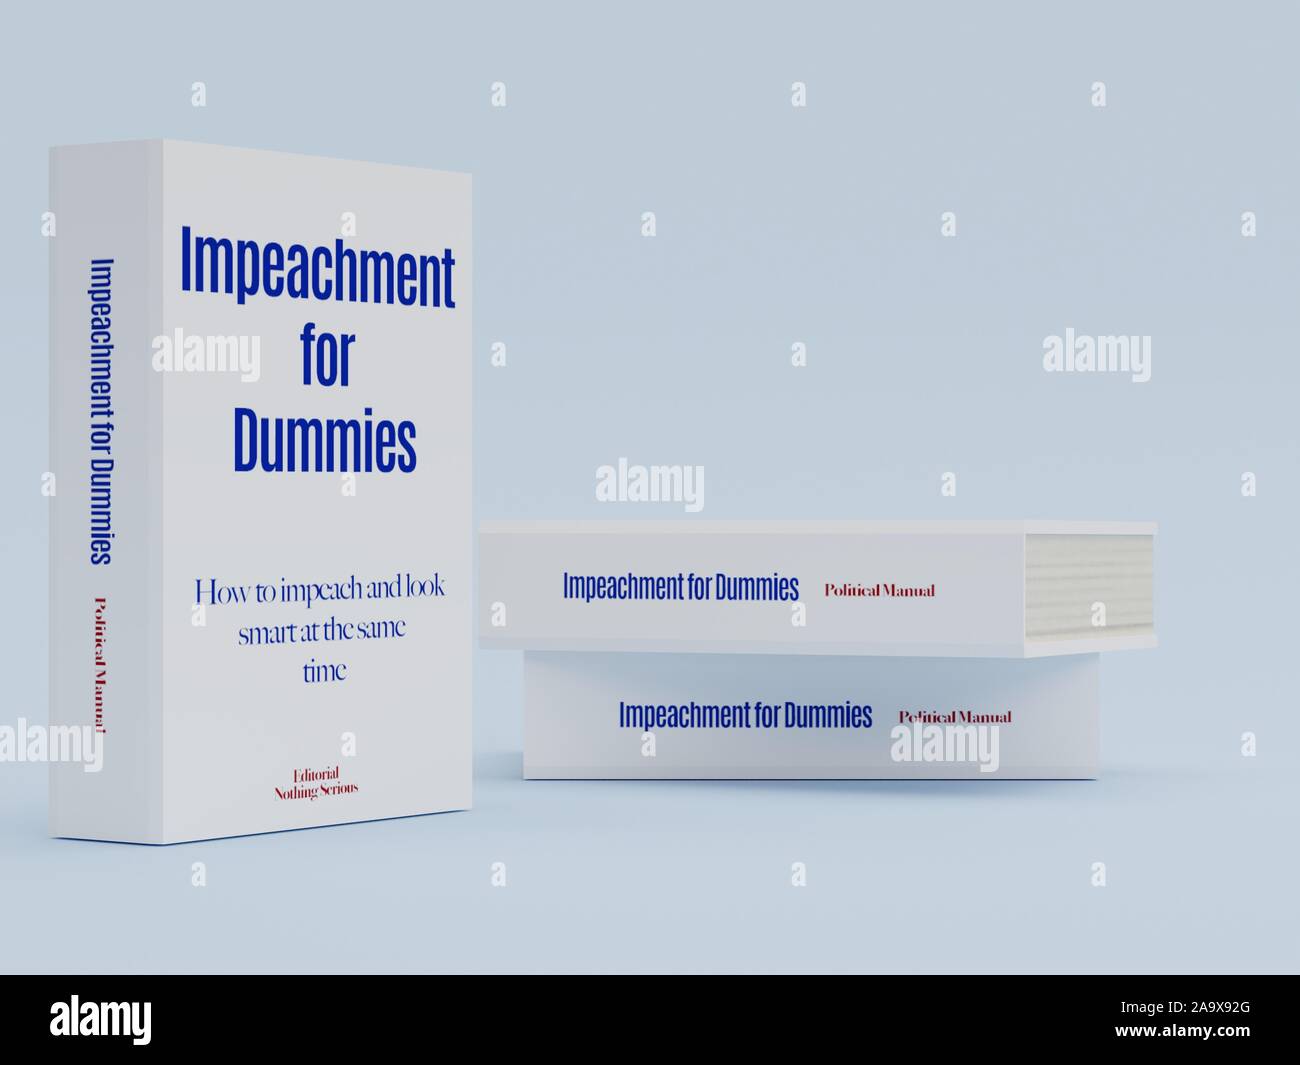 Impeachment for Dummies - Impeachment controversial fake cover book. 3D Render Illustration. Stock Photo